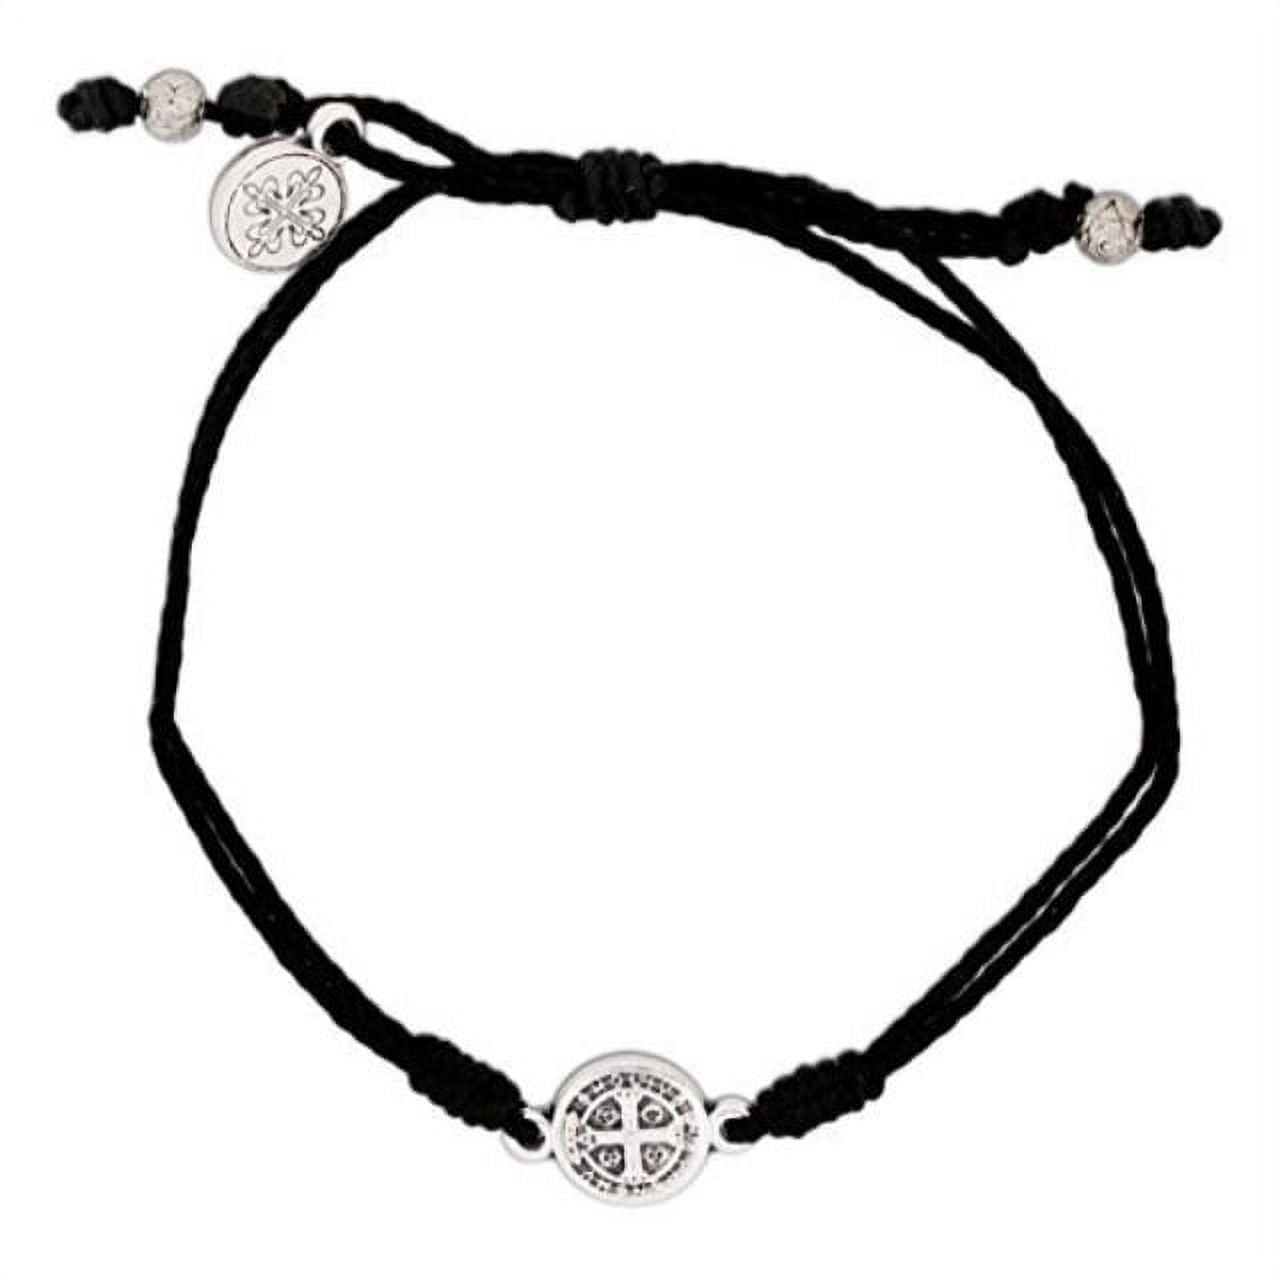 Silver Tone Saint Michael Slays the Demon Catholic Protection Bracelet for  Women or Men, White Adjustable Cord Bracelet with Strength Charm, 7 Inch :  Amazon.ca: Clothing, Shoes & Accessories